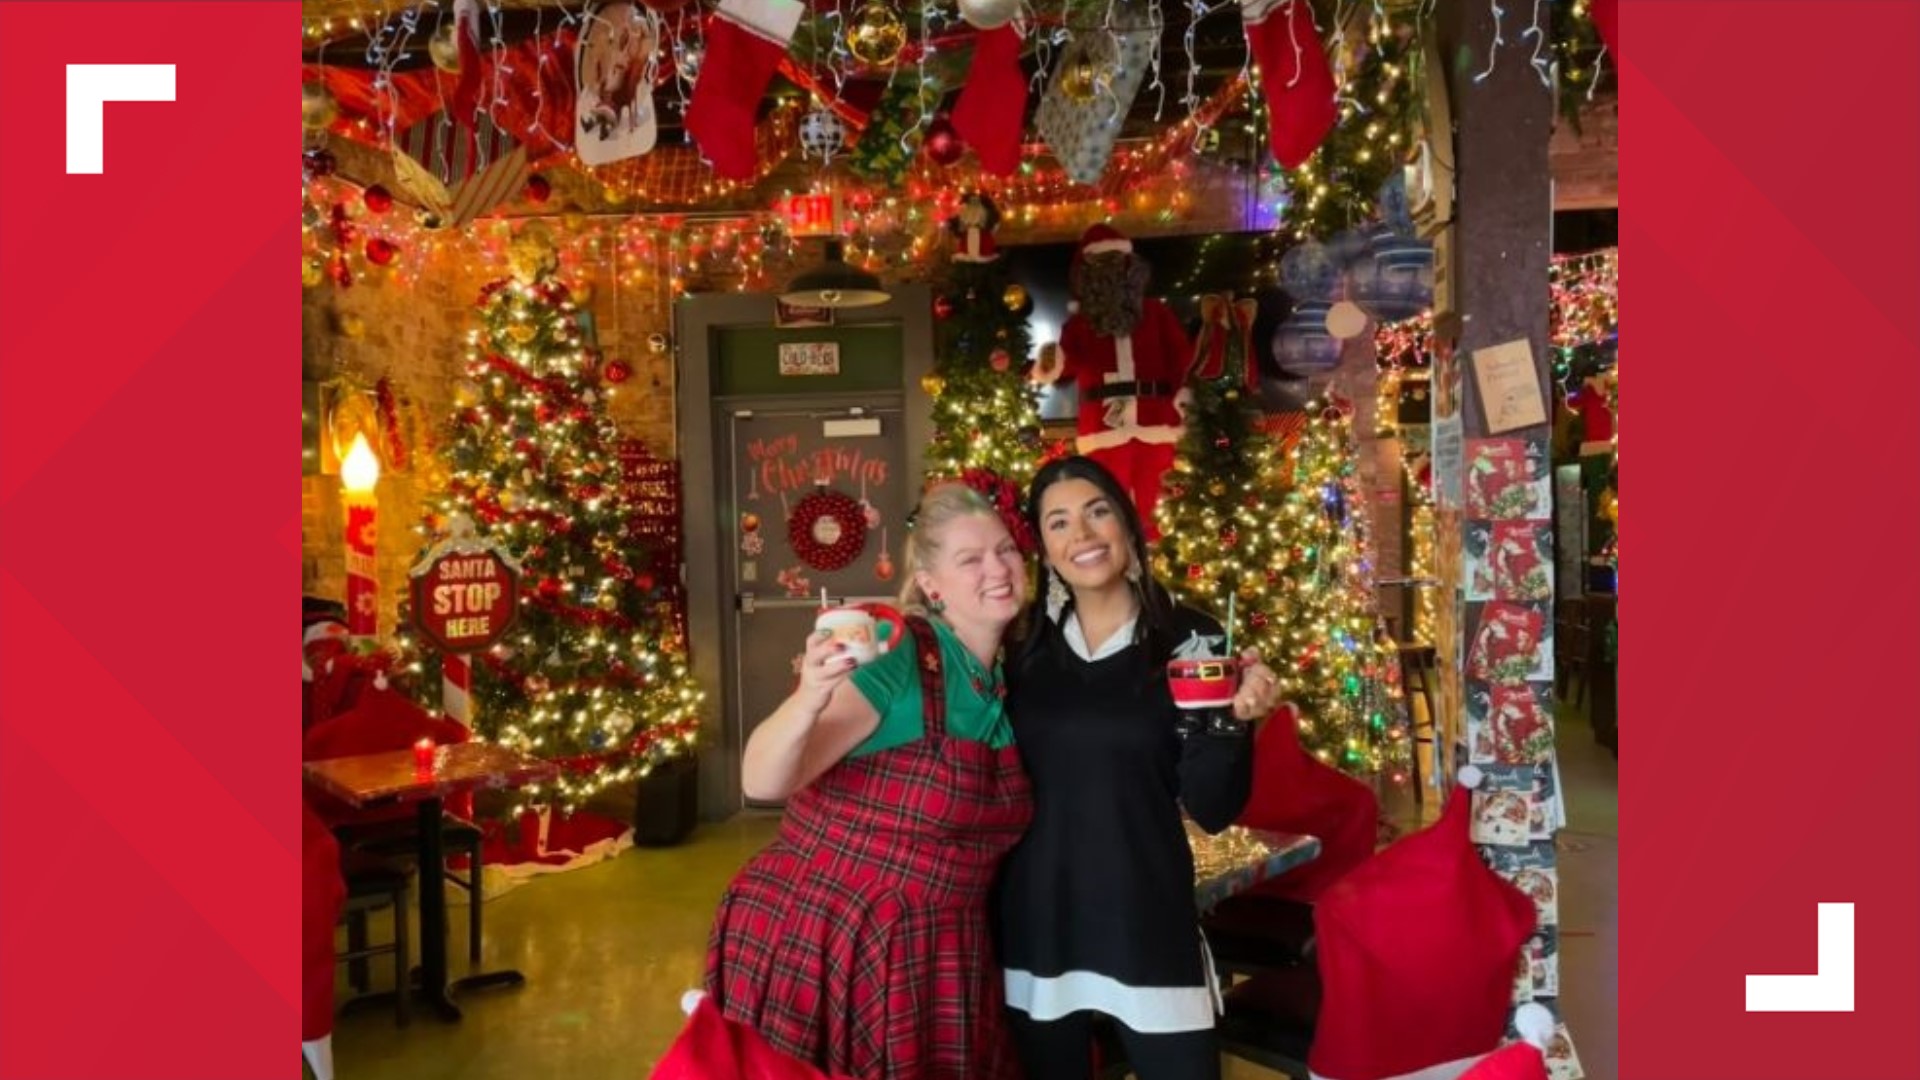 Small Change cocktail bar sure has decked the halls! This festive pop-up claims to get even the grouchiest Grinch in the holiday spirit.